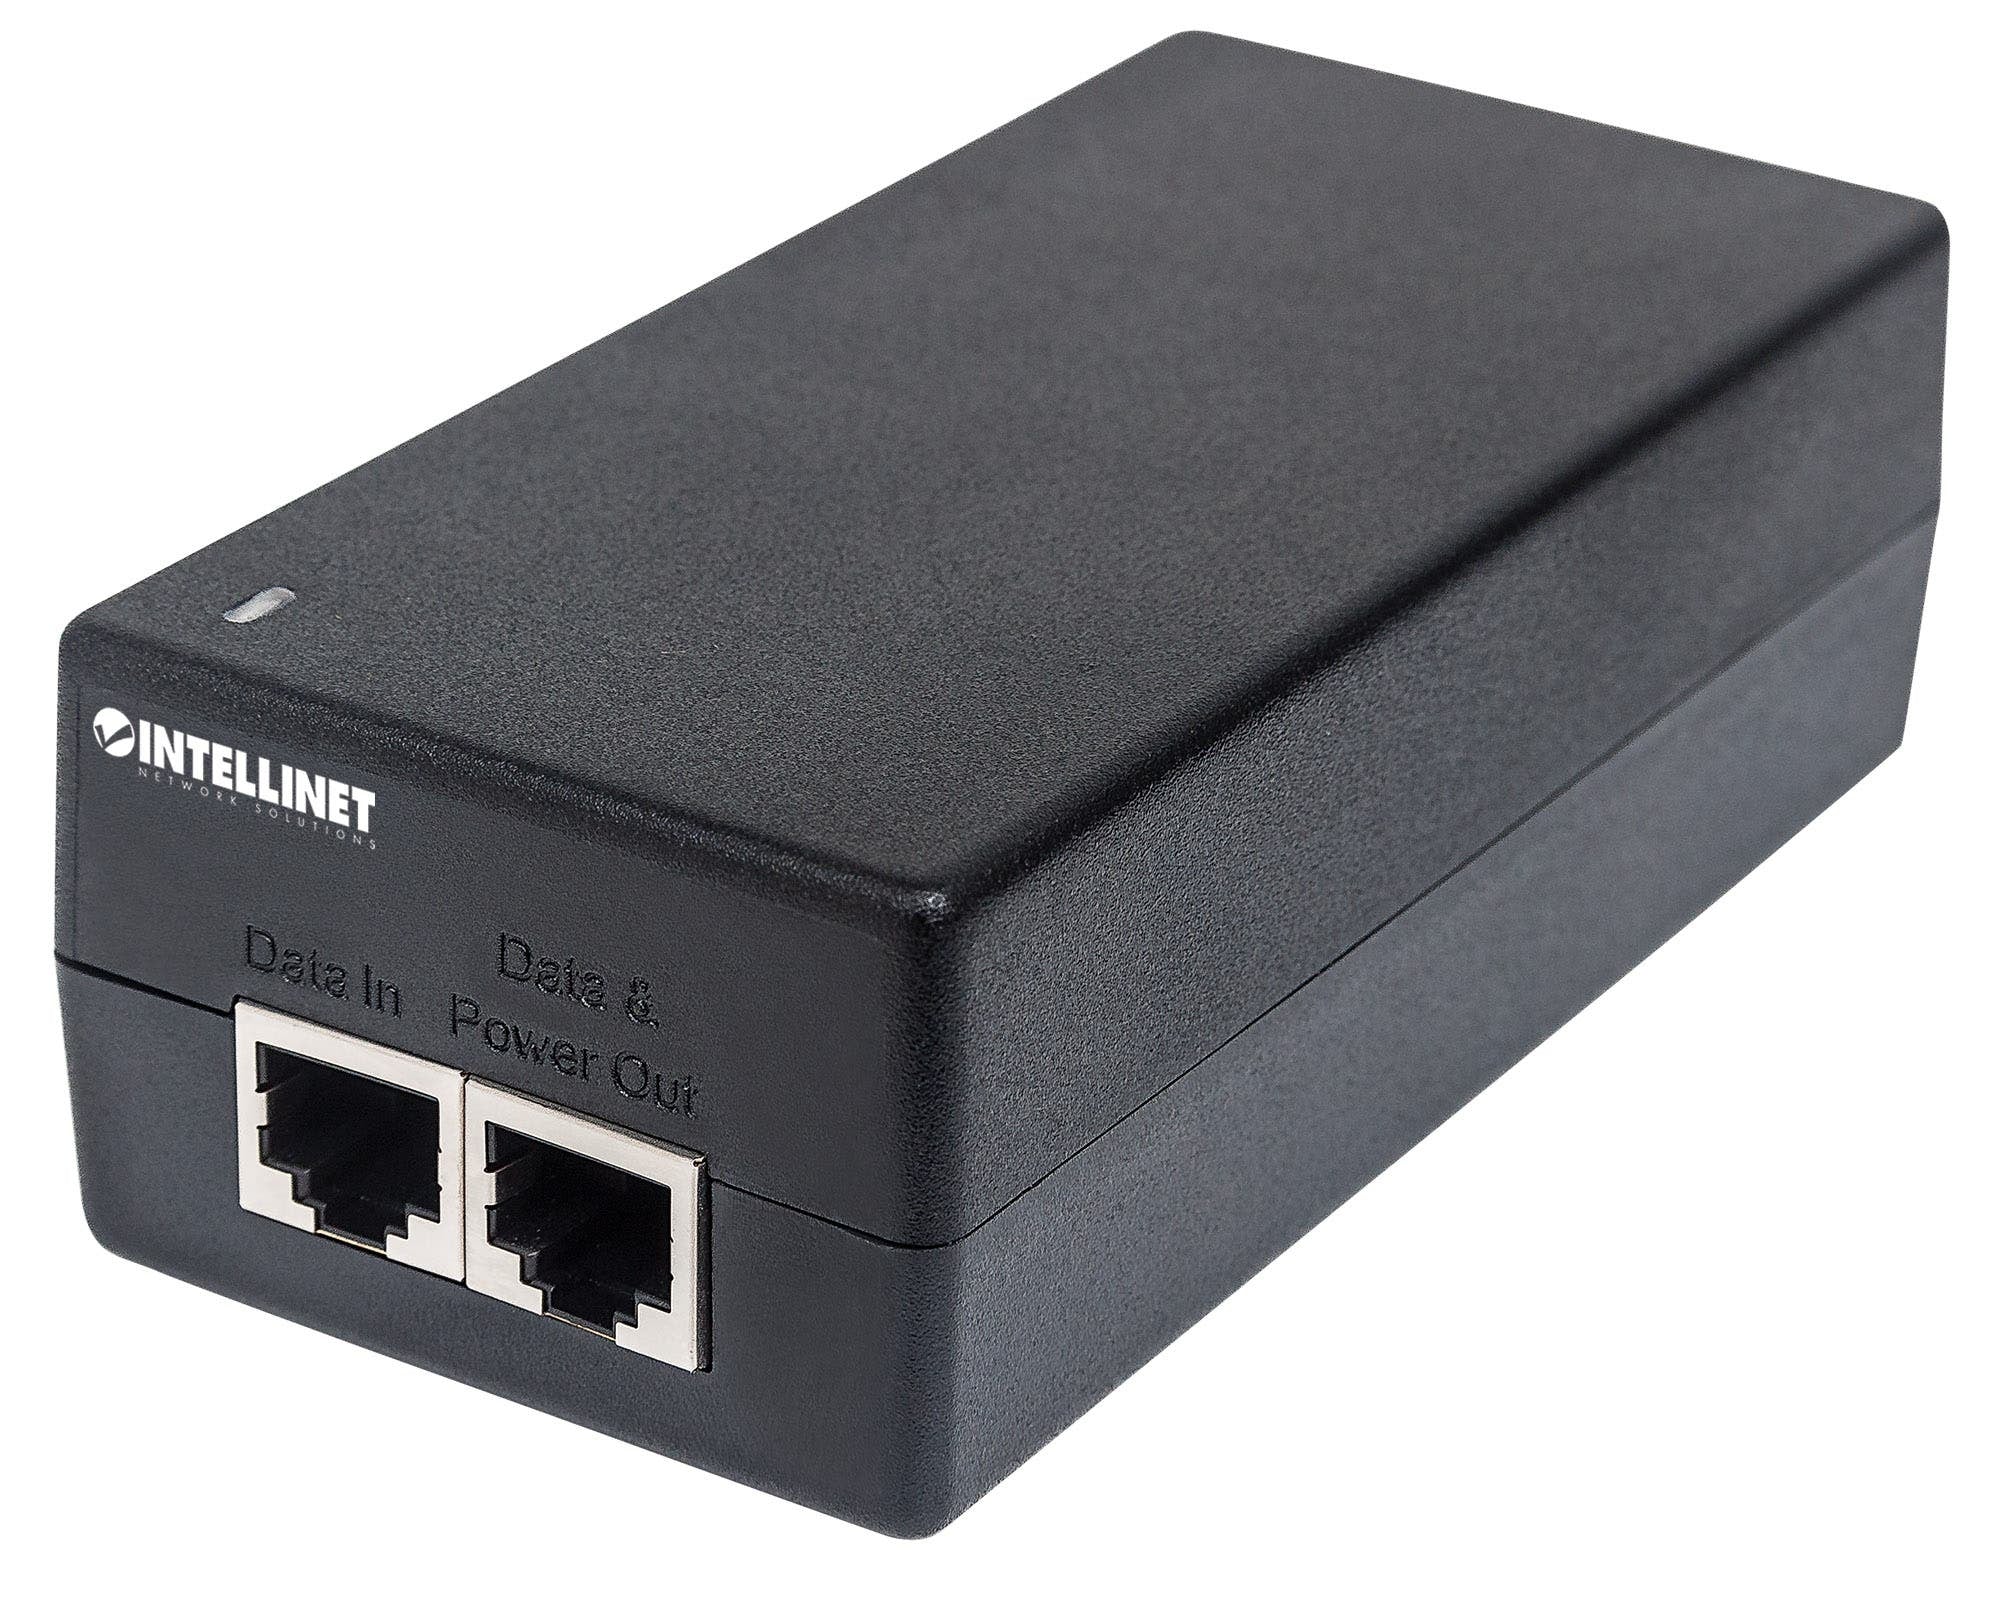 Intellinet Gigabit Ultra PoE+ Injector, 1 x 60 W Port, IEEE 802.3bt and IEEE 802.3at/af Compliant, Plastic Housing (UK Power Cord)